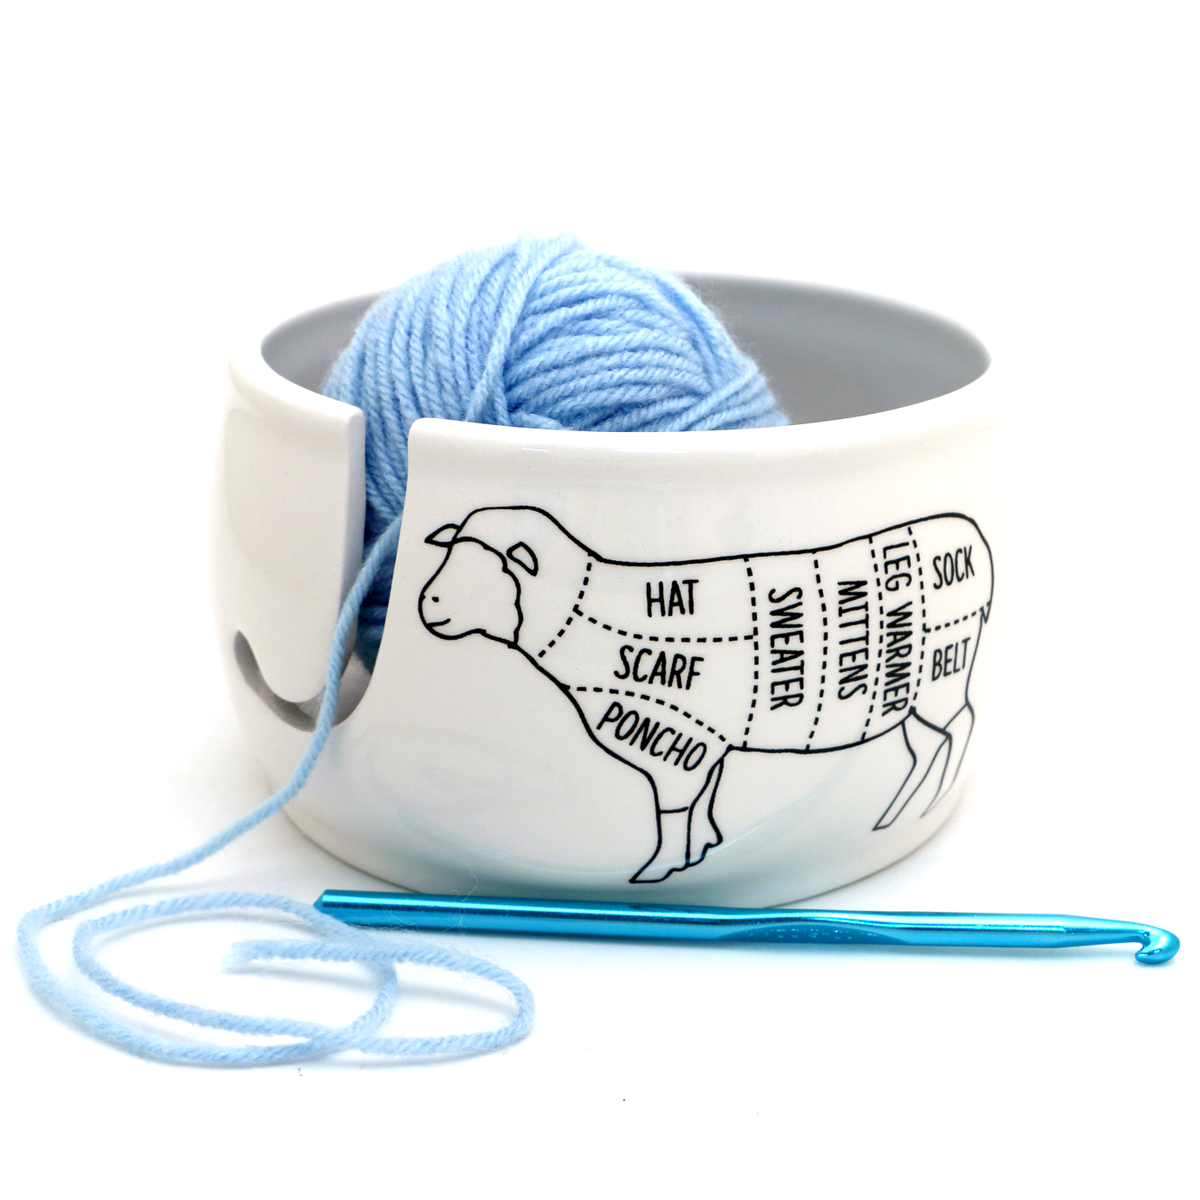 Gifts for DAD - 7 Ceramic Yarn Bowl Holder Bowls for Knitting